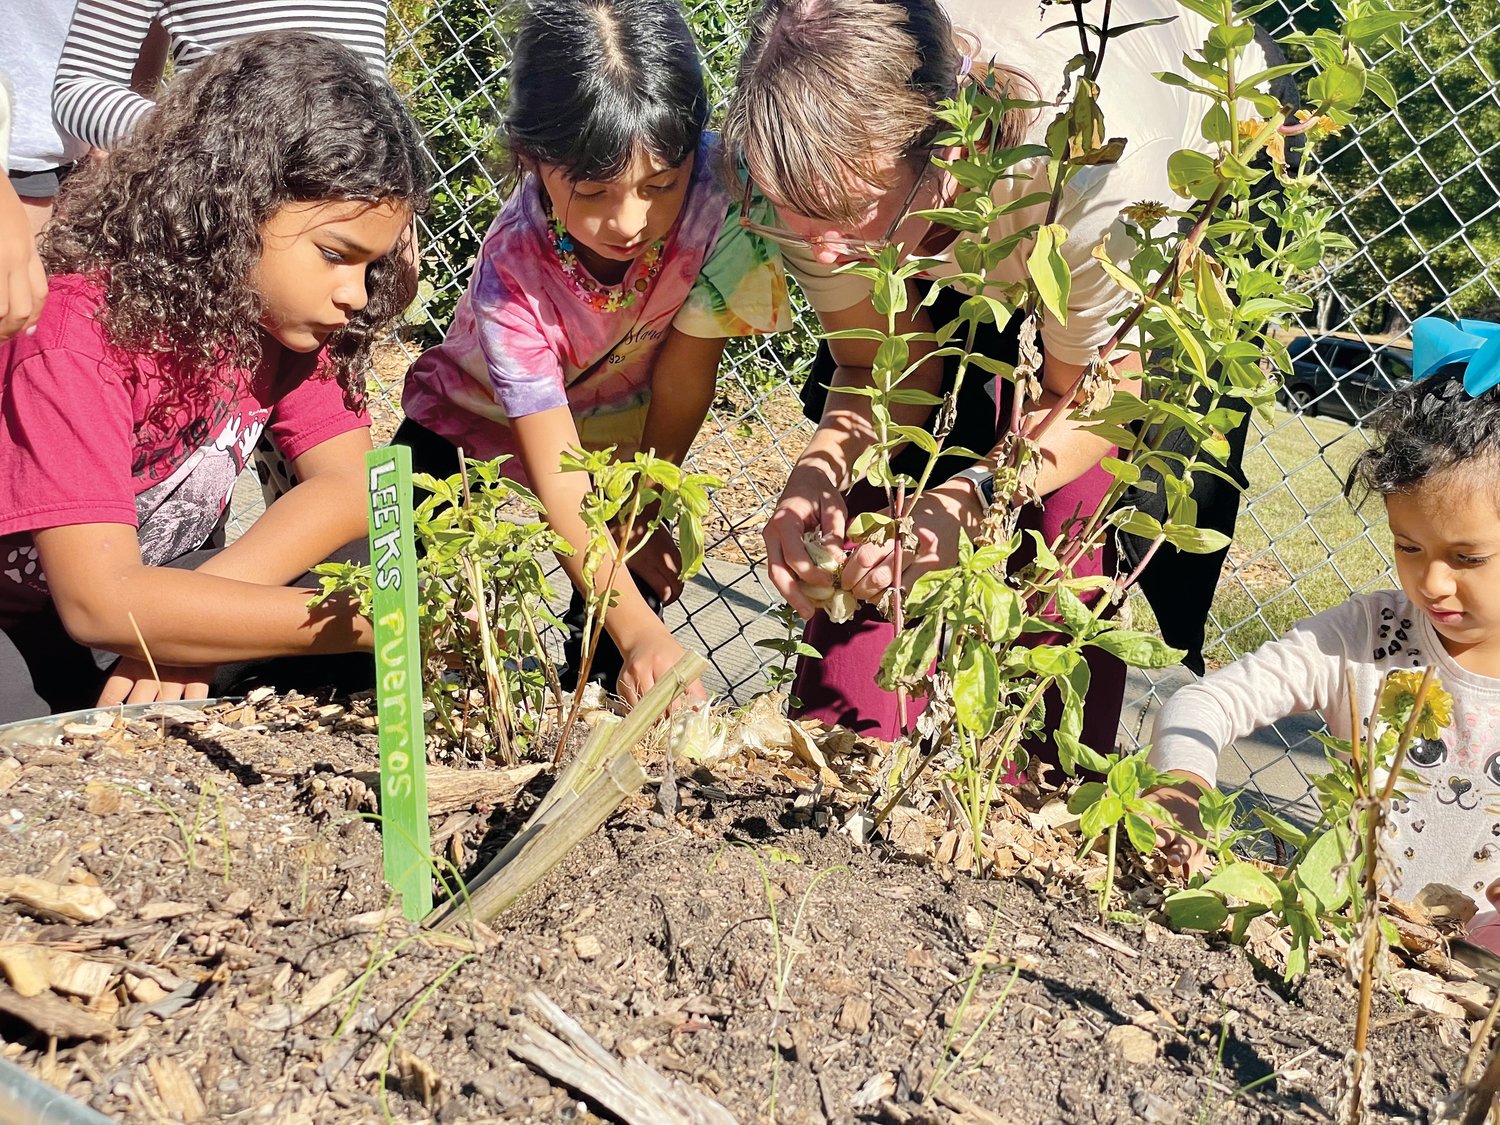 Marianne Maschal, center right, teaches students at North Chatham Elementary how to plant leeks in a raised planter bed. Maschal oversees the garden and tends to it daily.